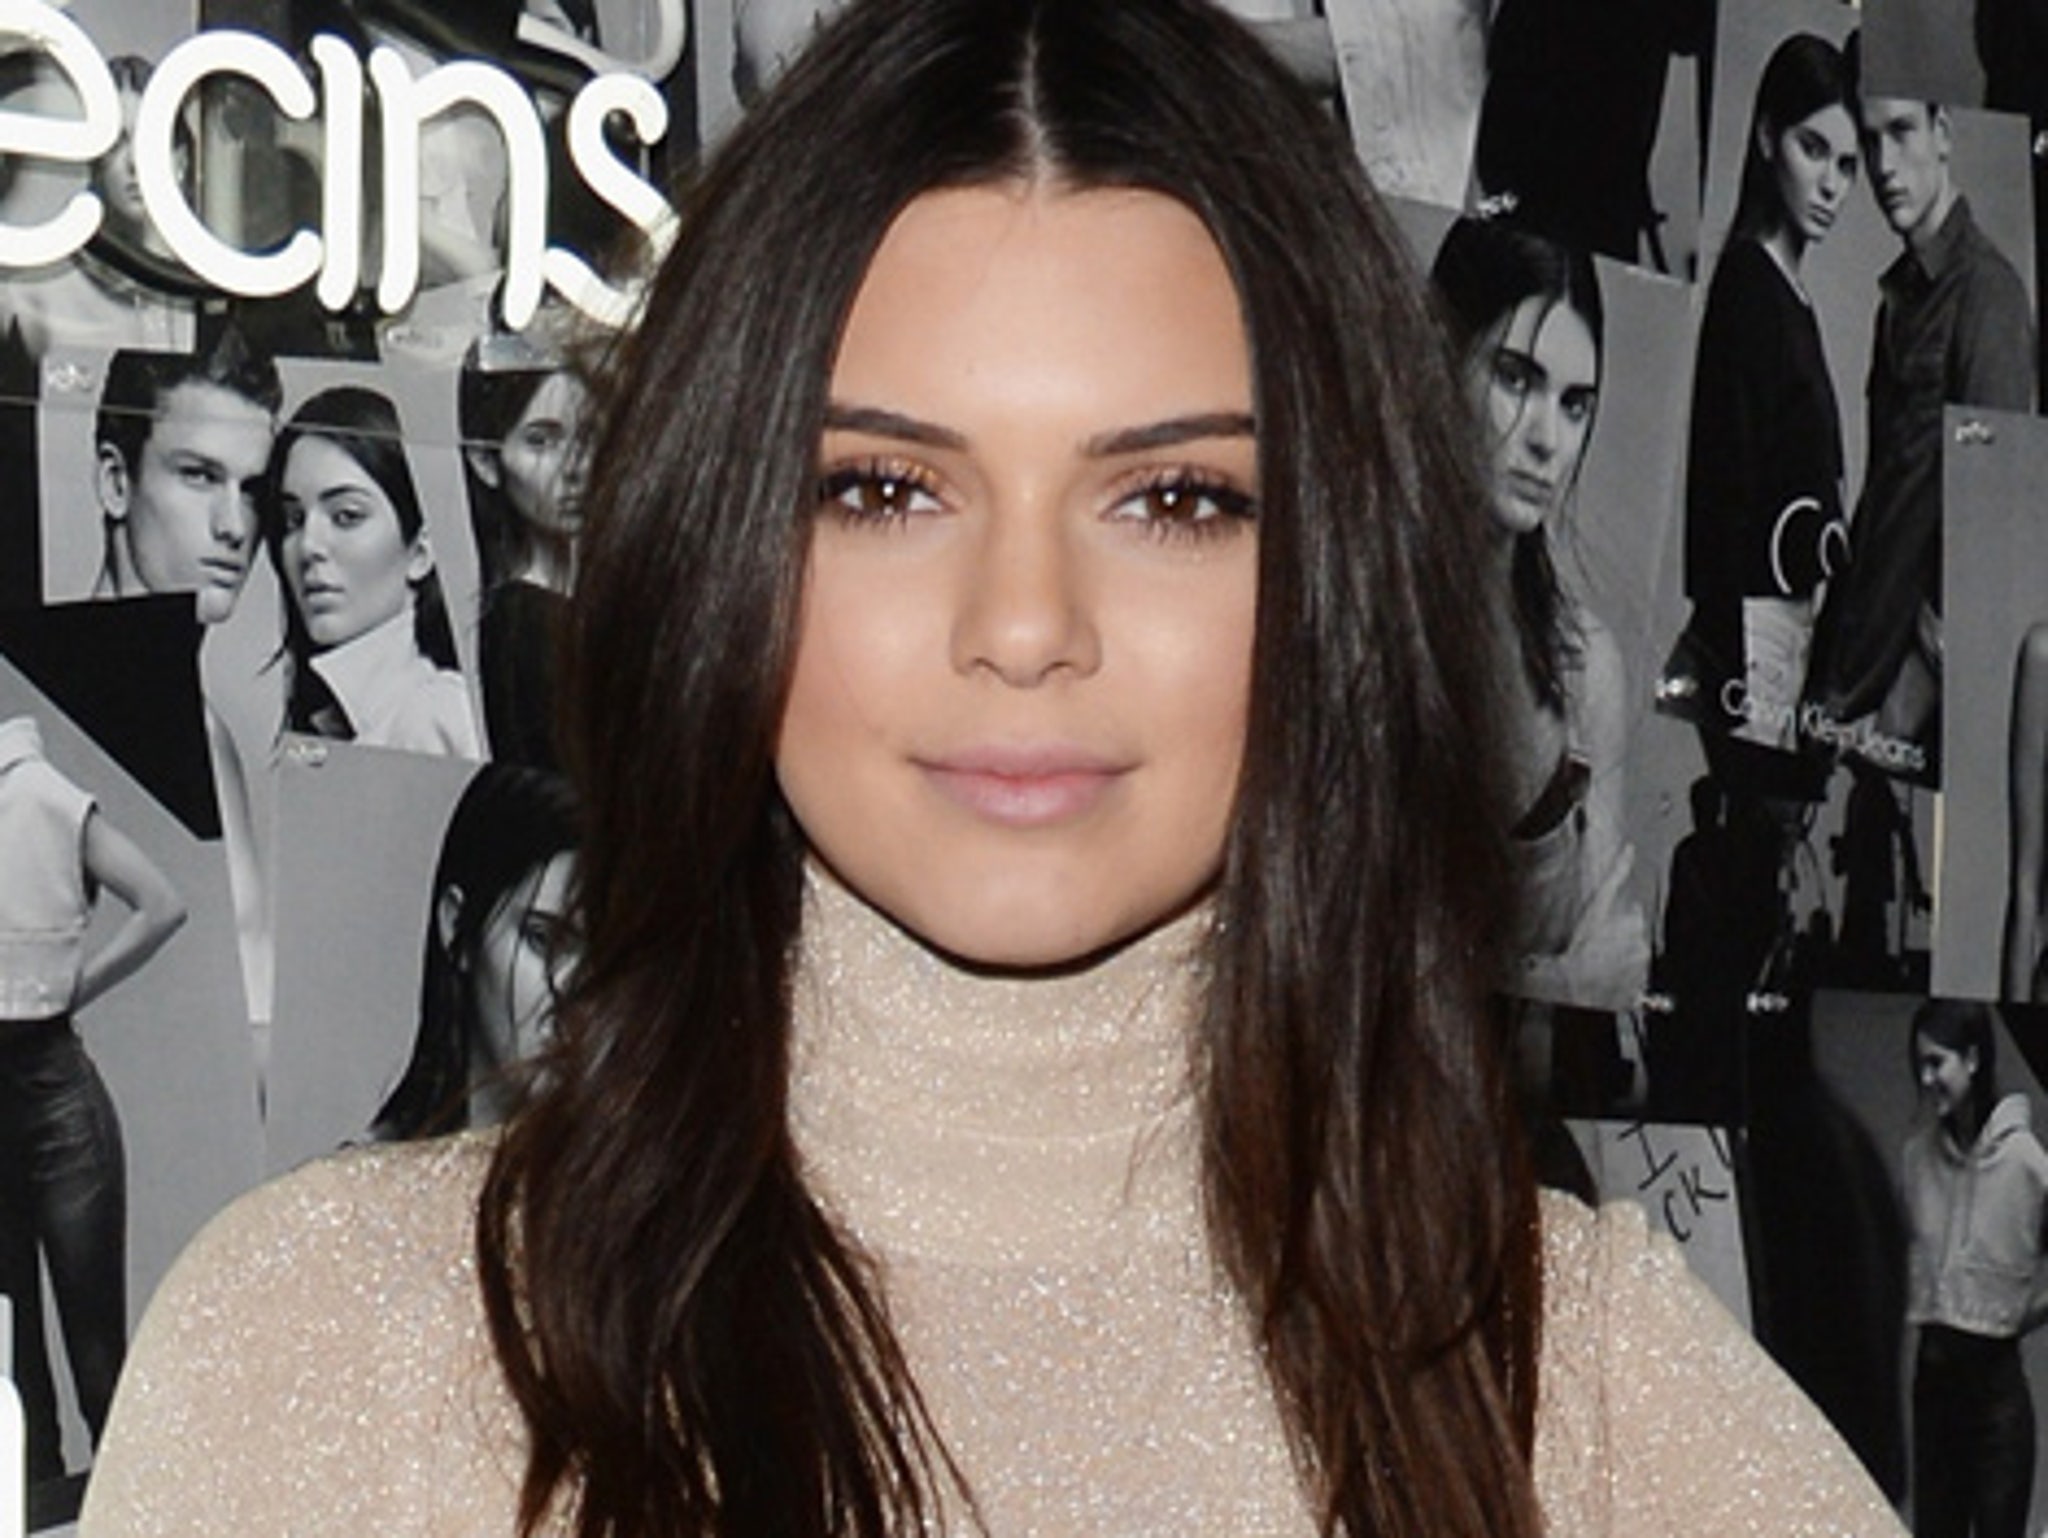 Kendall Jenner flashes her bare butt in tiny Calvin Klein